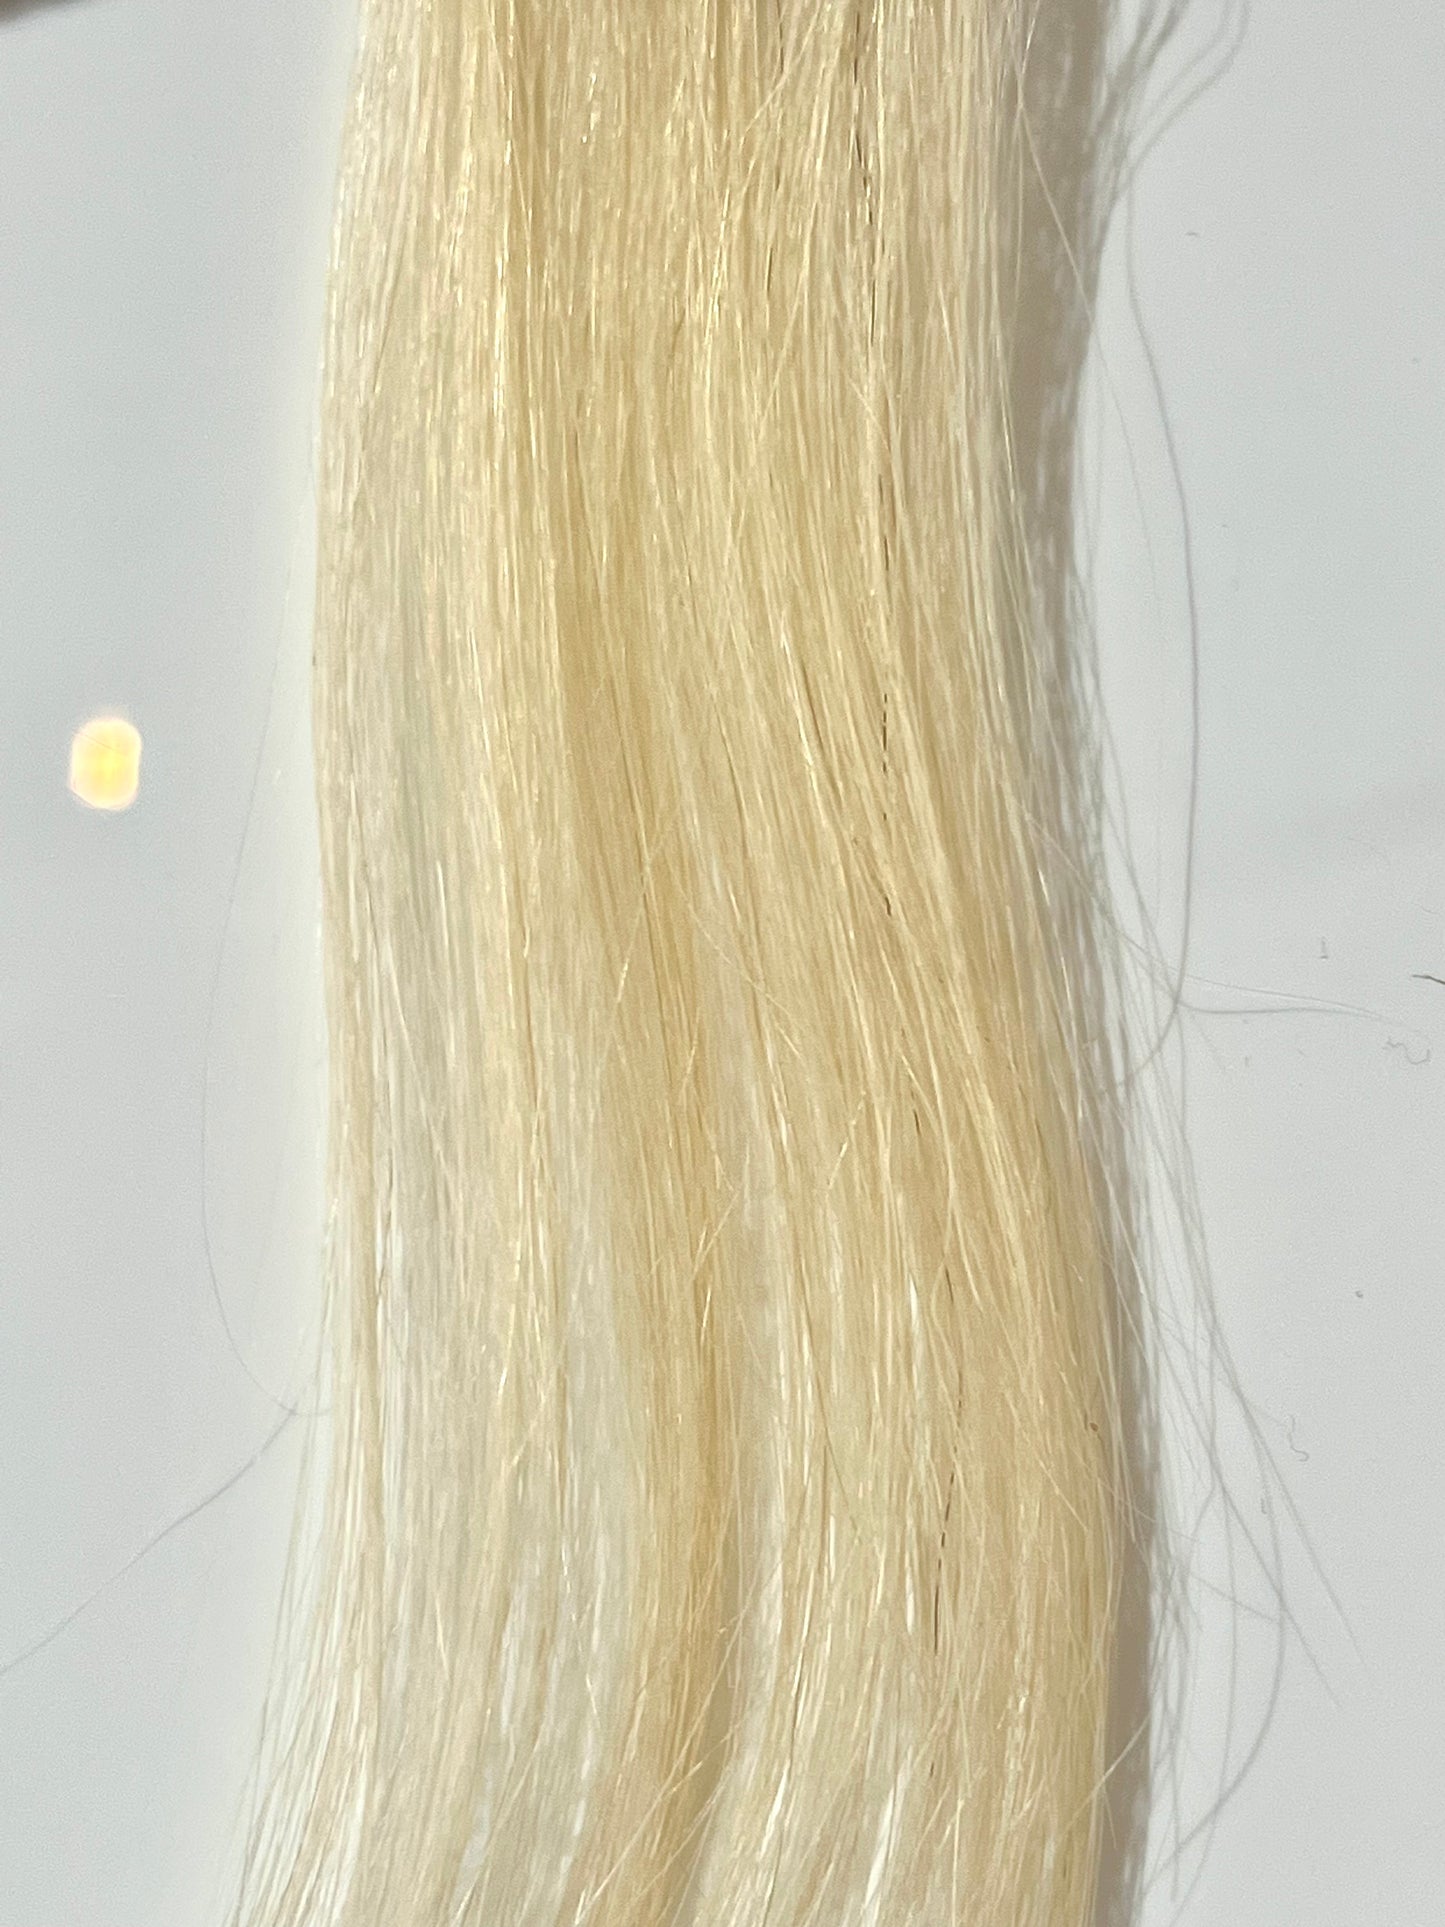 RETAIL HALO EXTENSIONS - NATURAL - WARM BLONDE